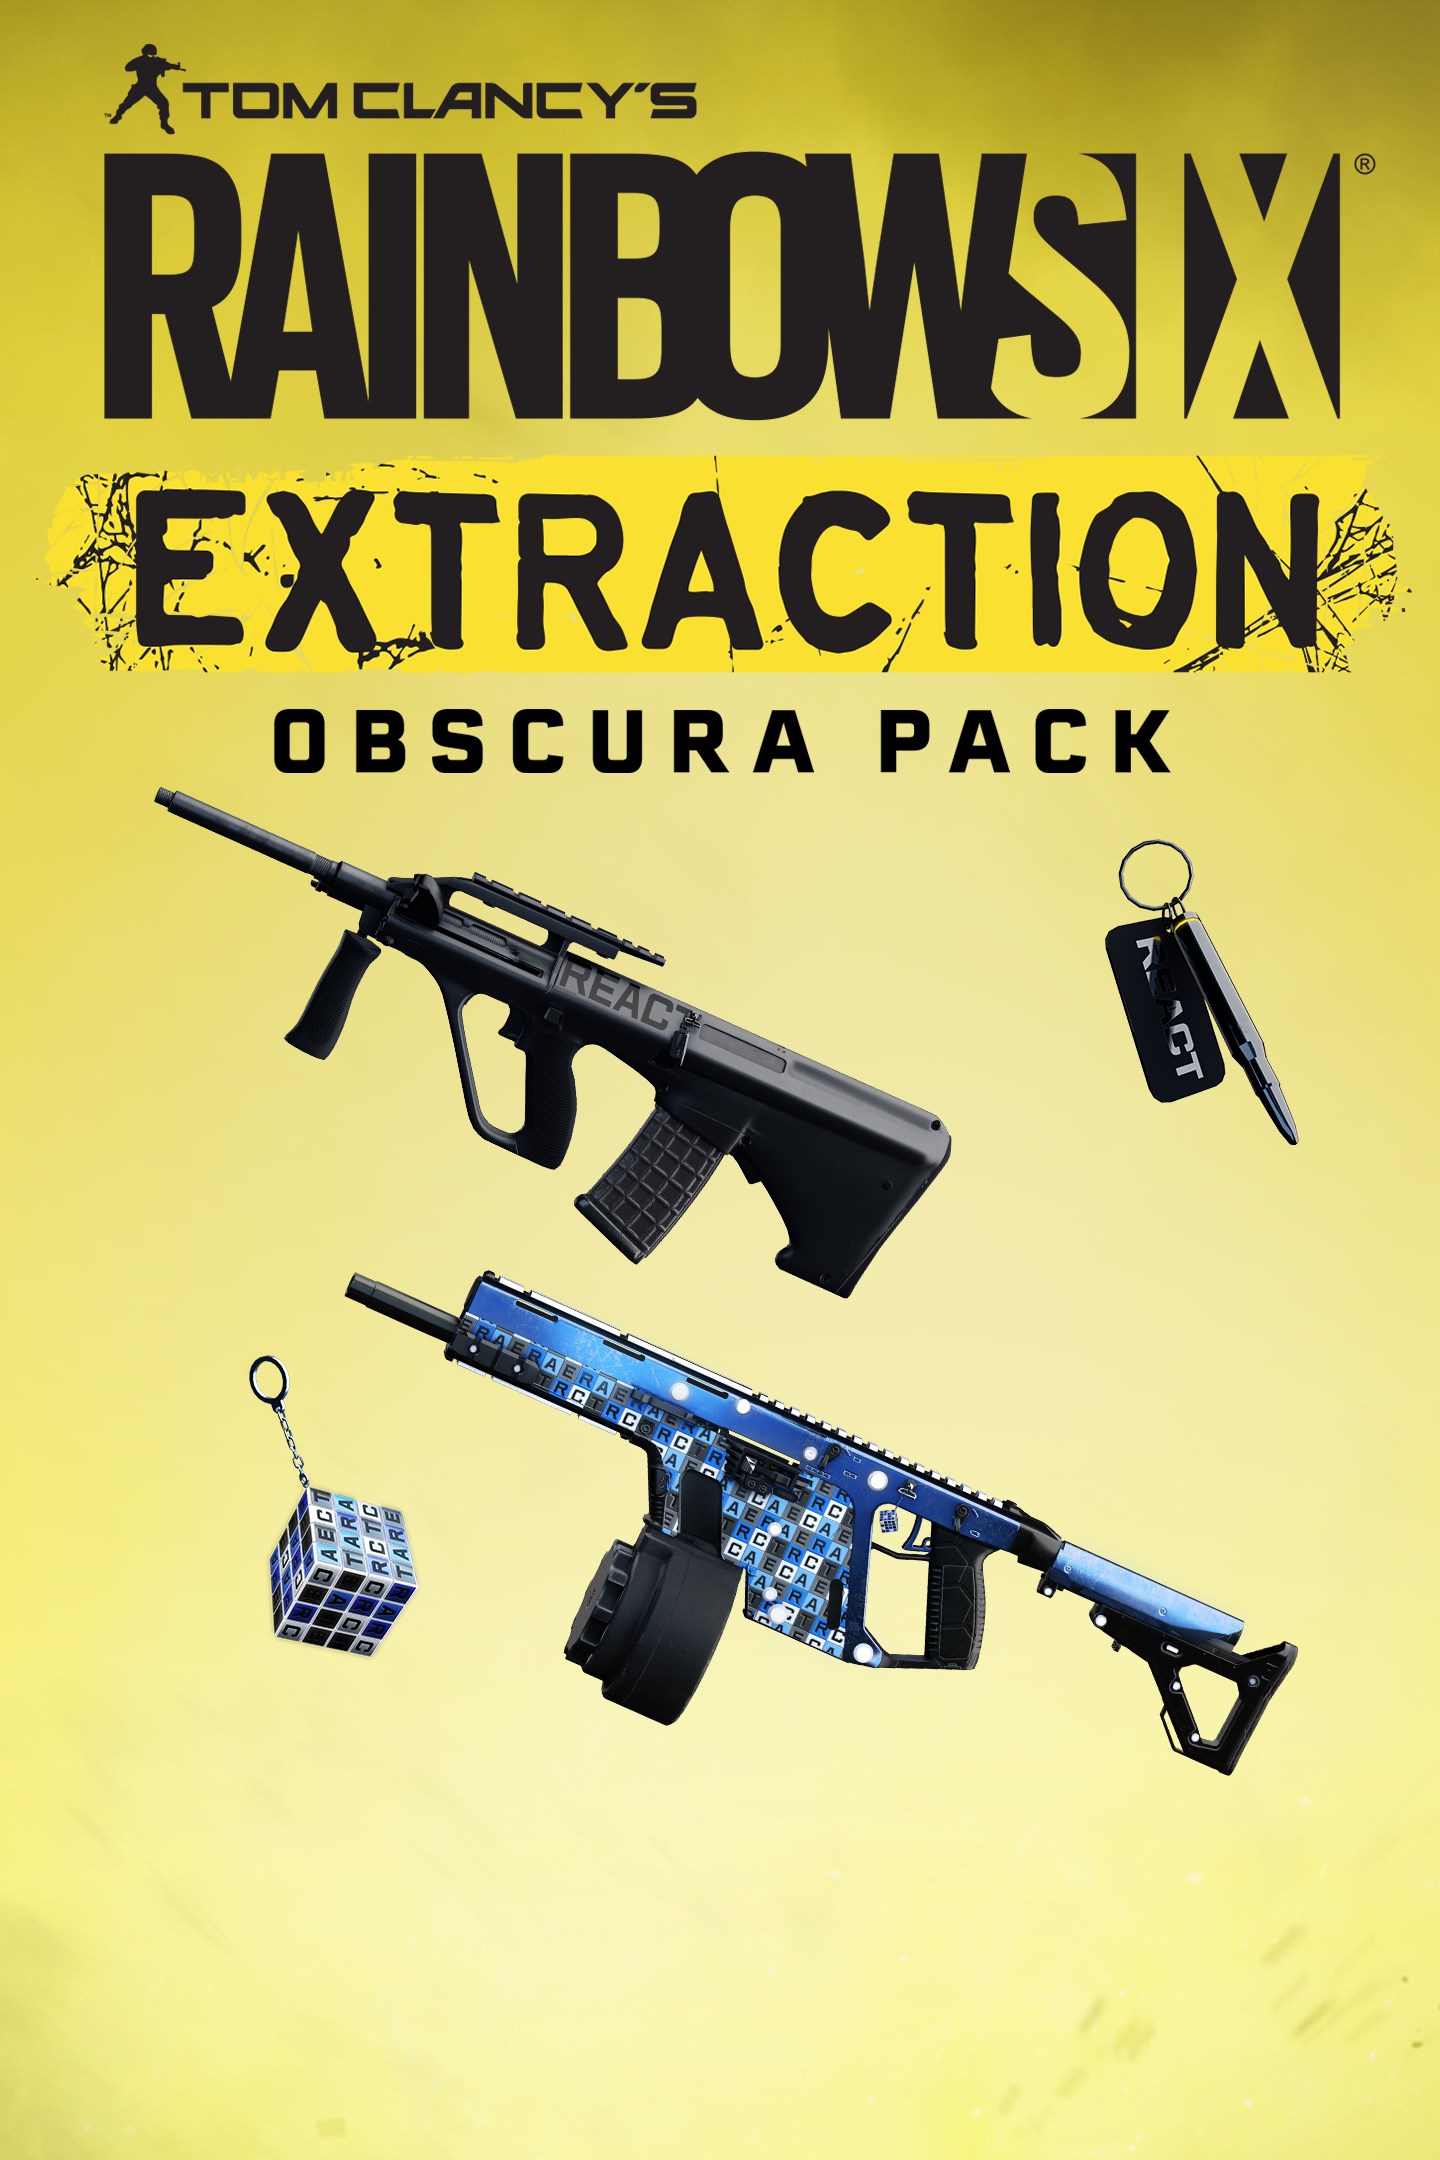 Tom Clancy's Rainbow Six Extraction - Obscura Pack DLC EU PS4 CD Key